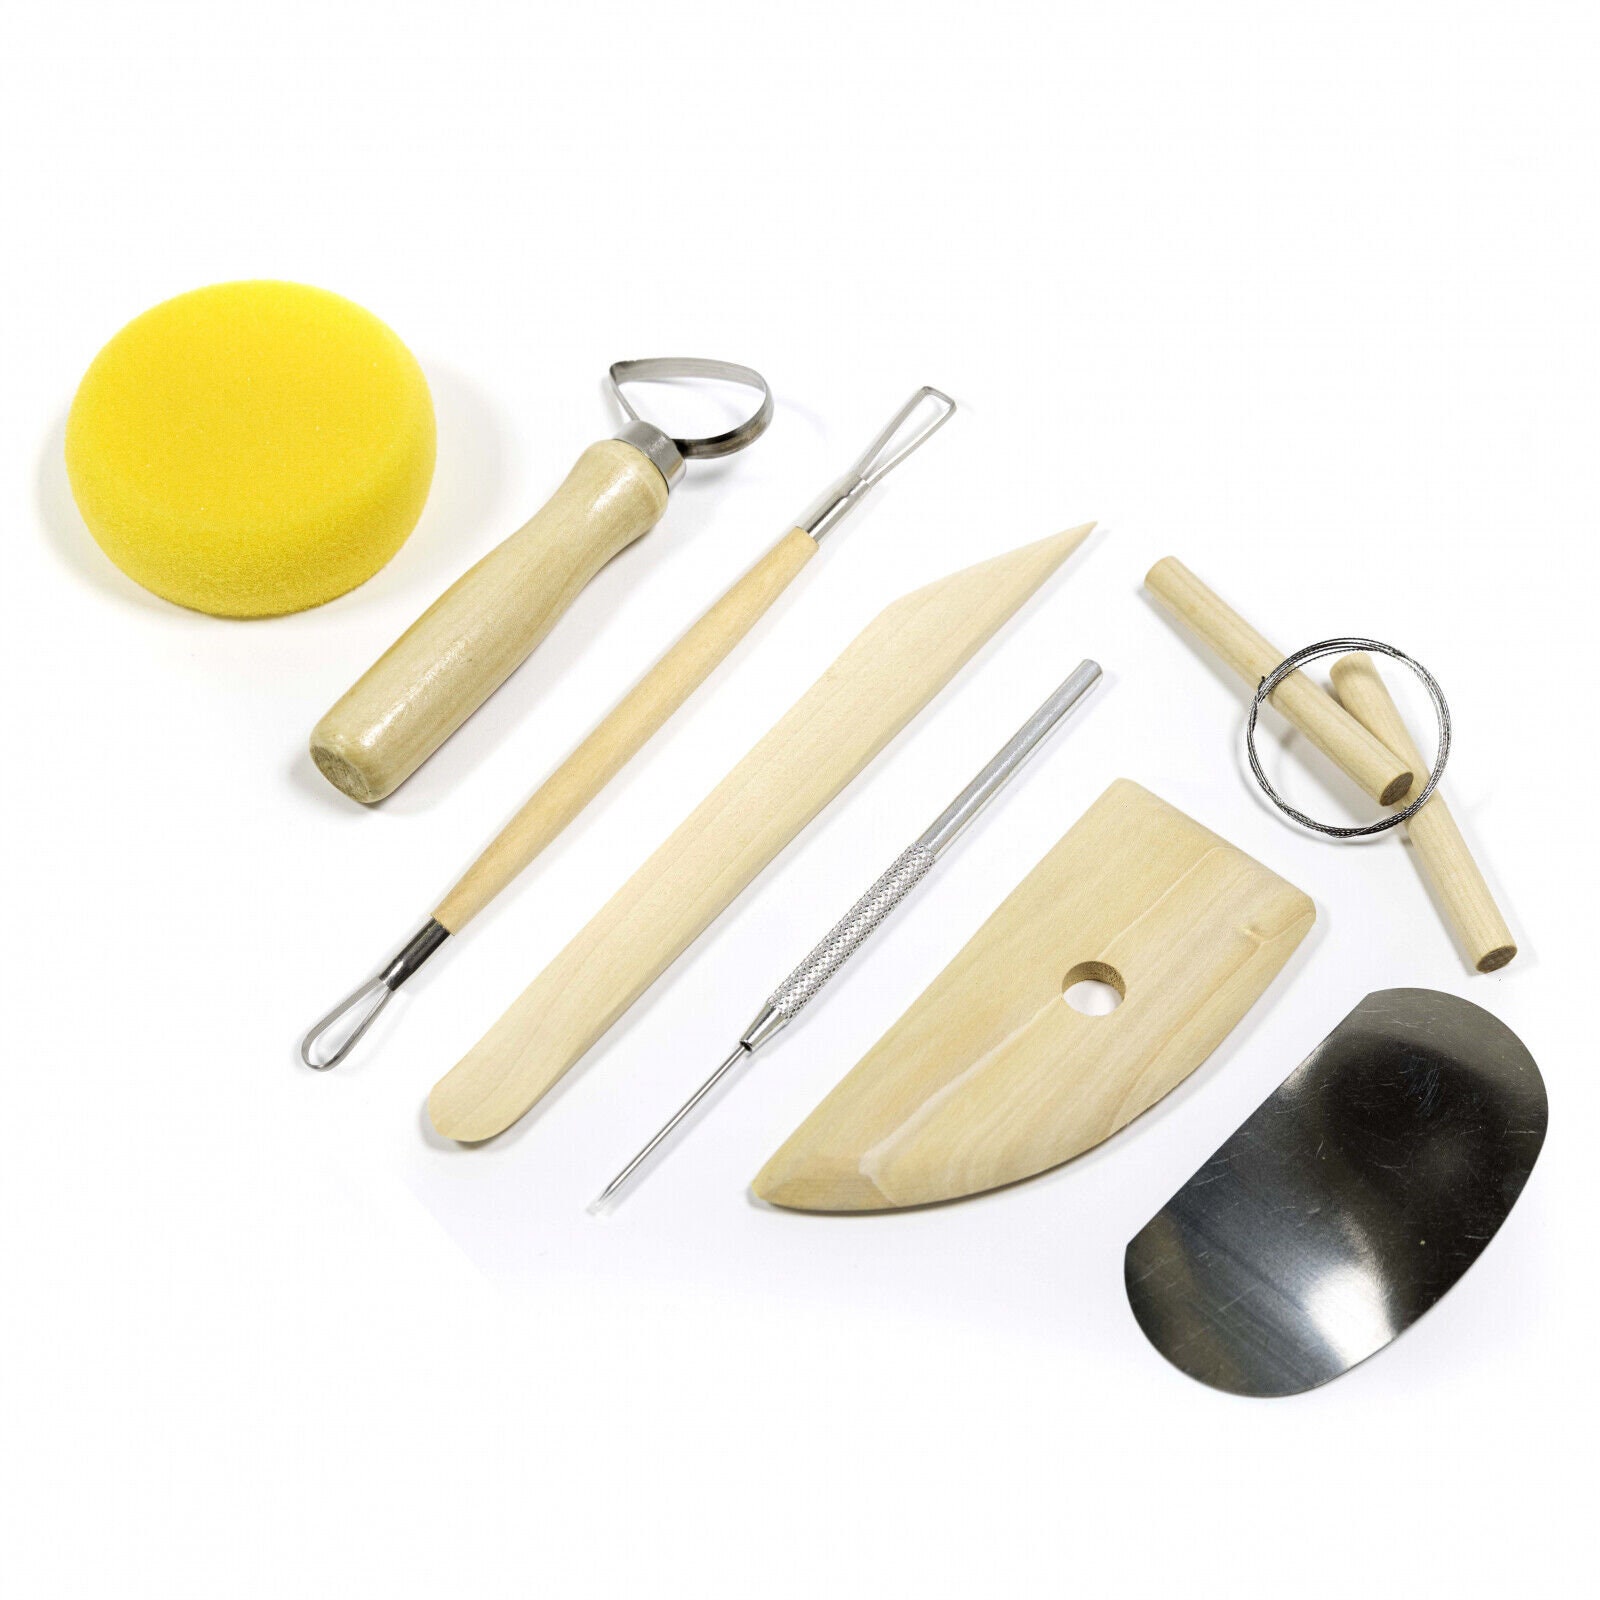 Reusable DIY Y Tool Kit For Handwork Clay, Scptures, Ceramics, And